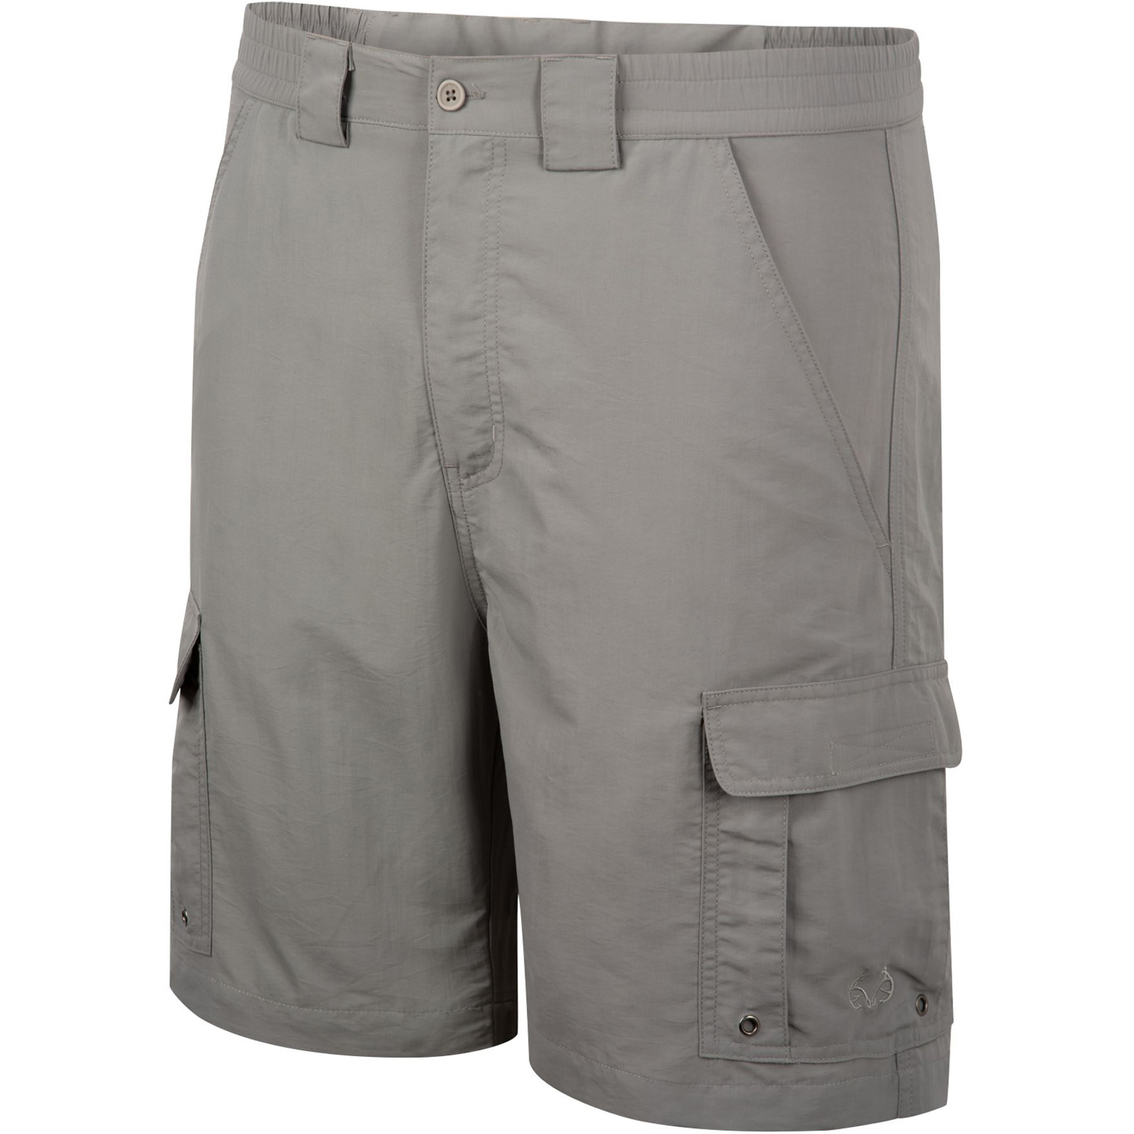 Realtree Deckhand Cargo Shorts | Shorts | Clothing & Accessories | Shop ...